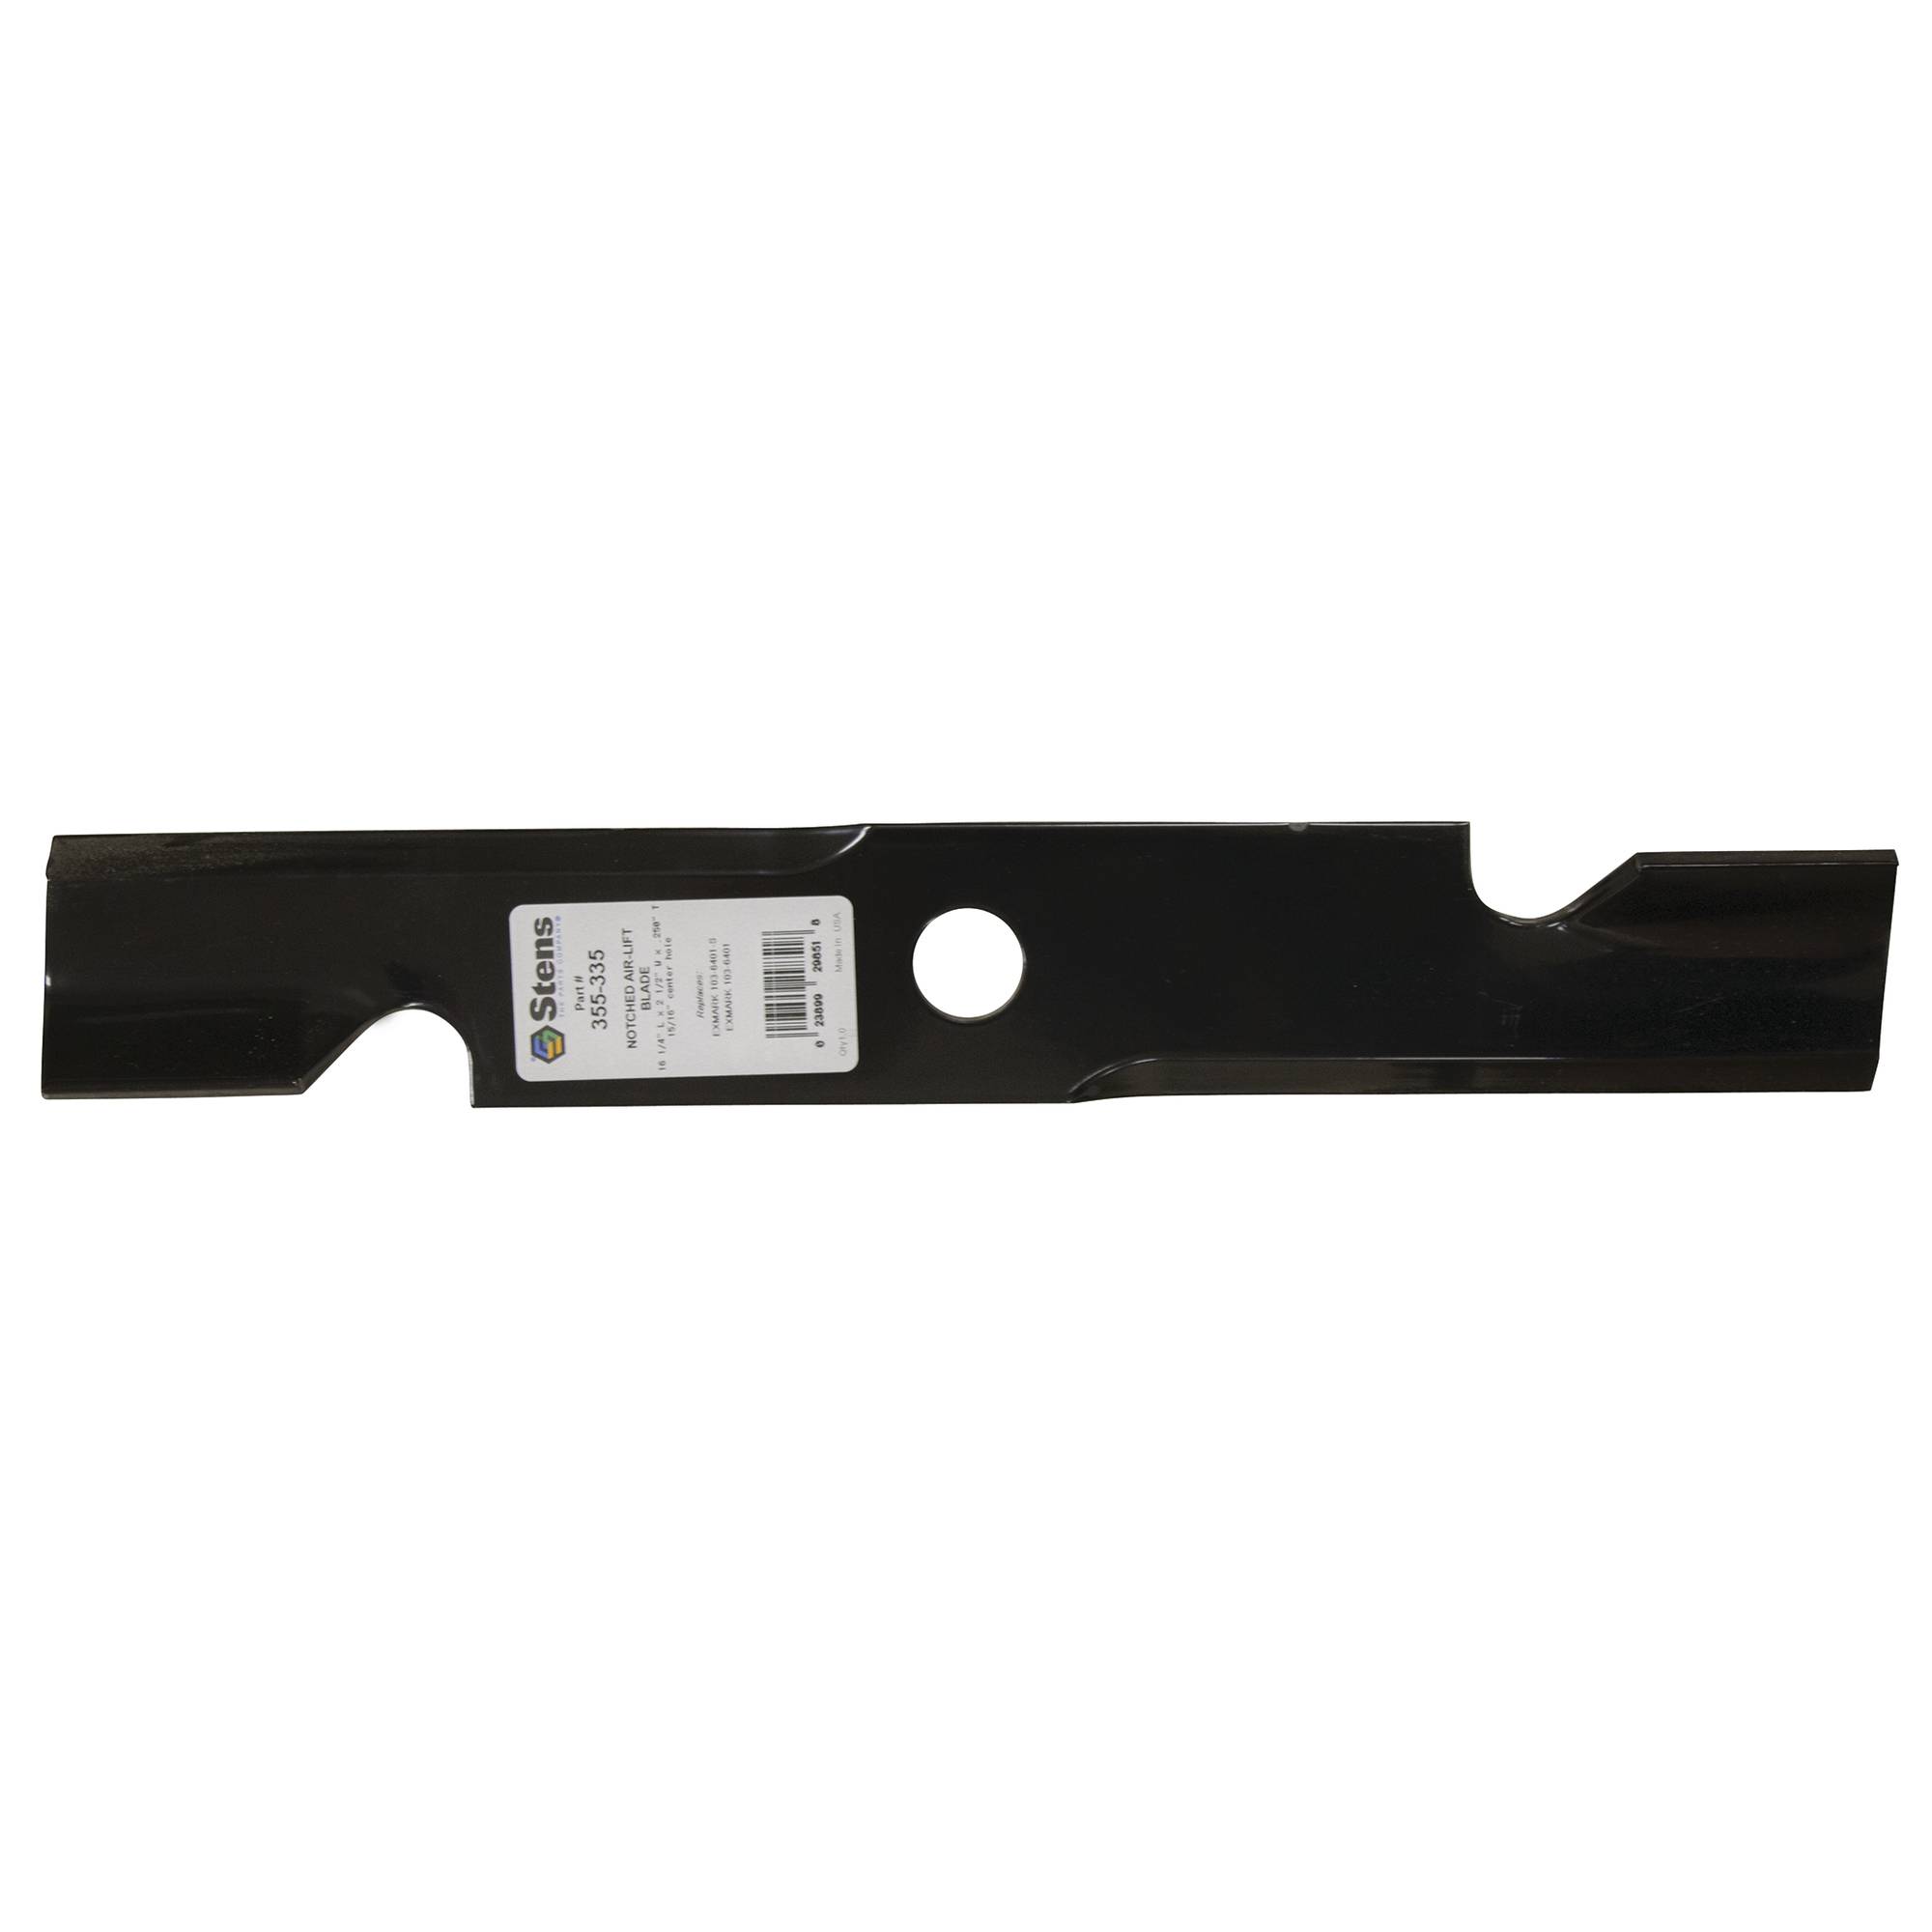 New Stens Notched Air-Lift Blade 355-335 for Exmark 103-6401-S - image 1 of 4